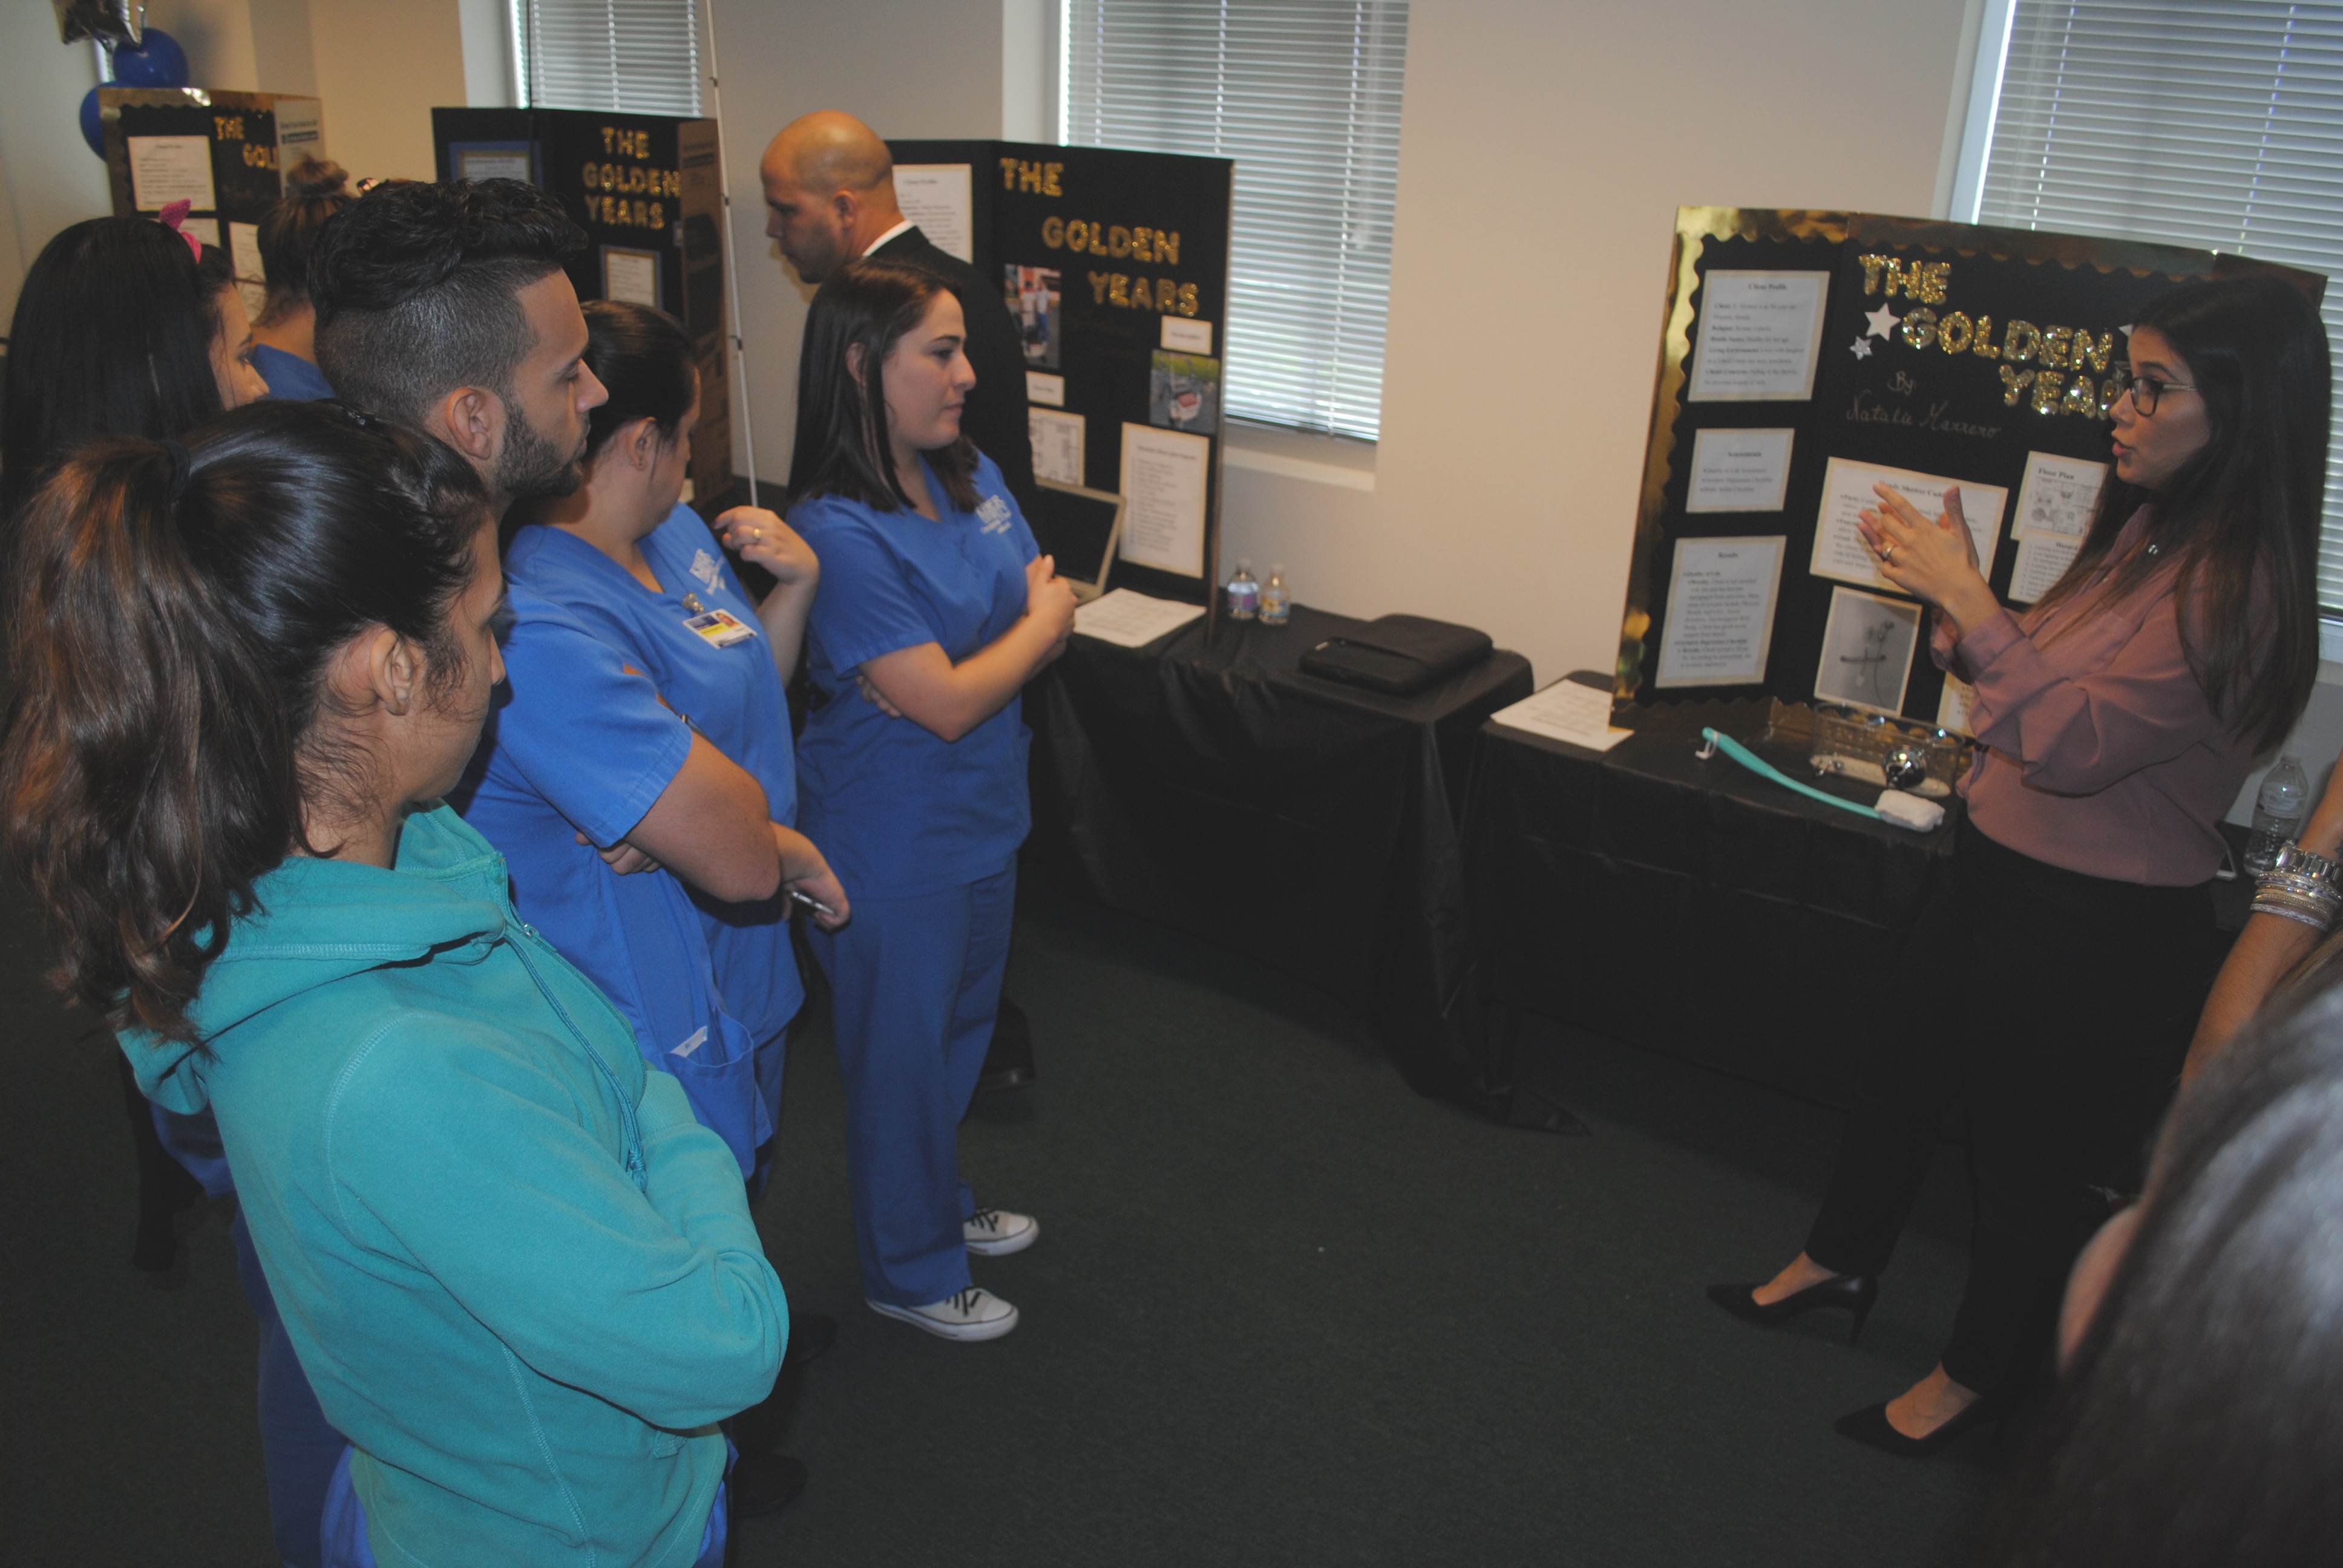 Miami OTA Students Showcases Aging in Place Projects